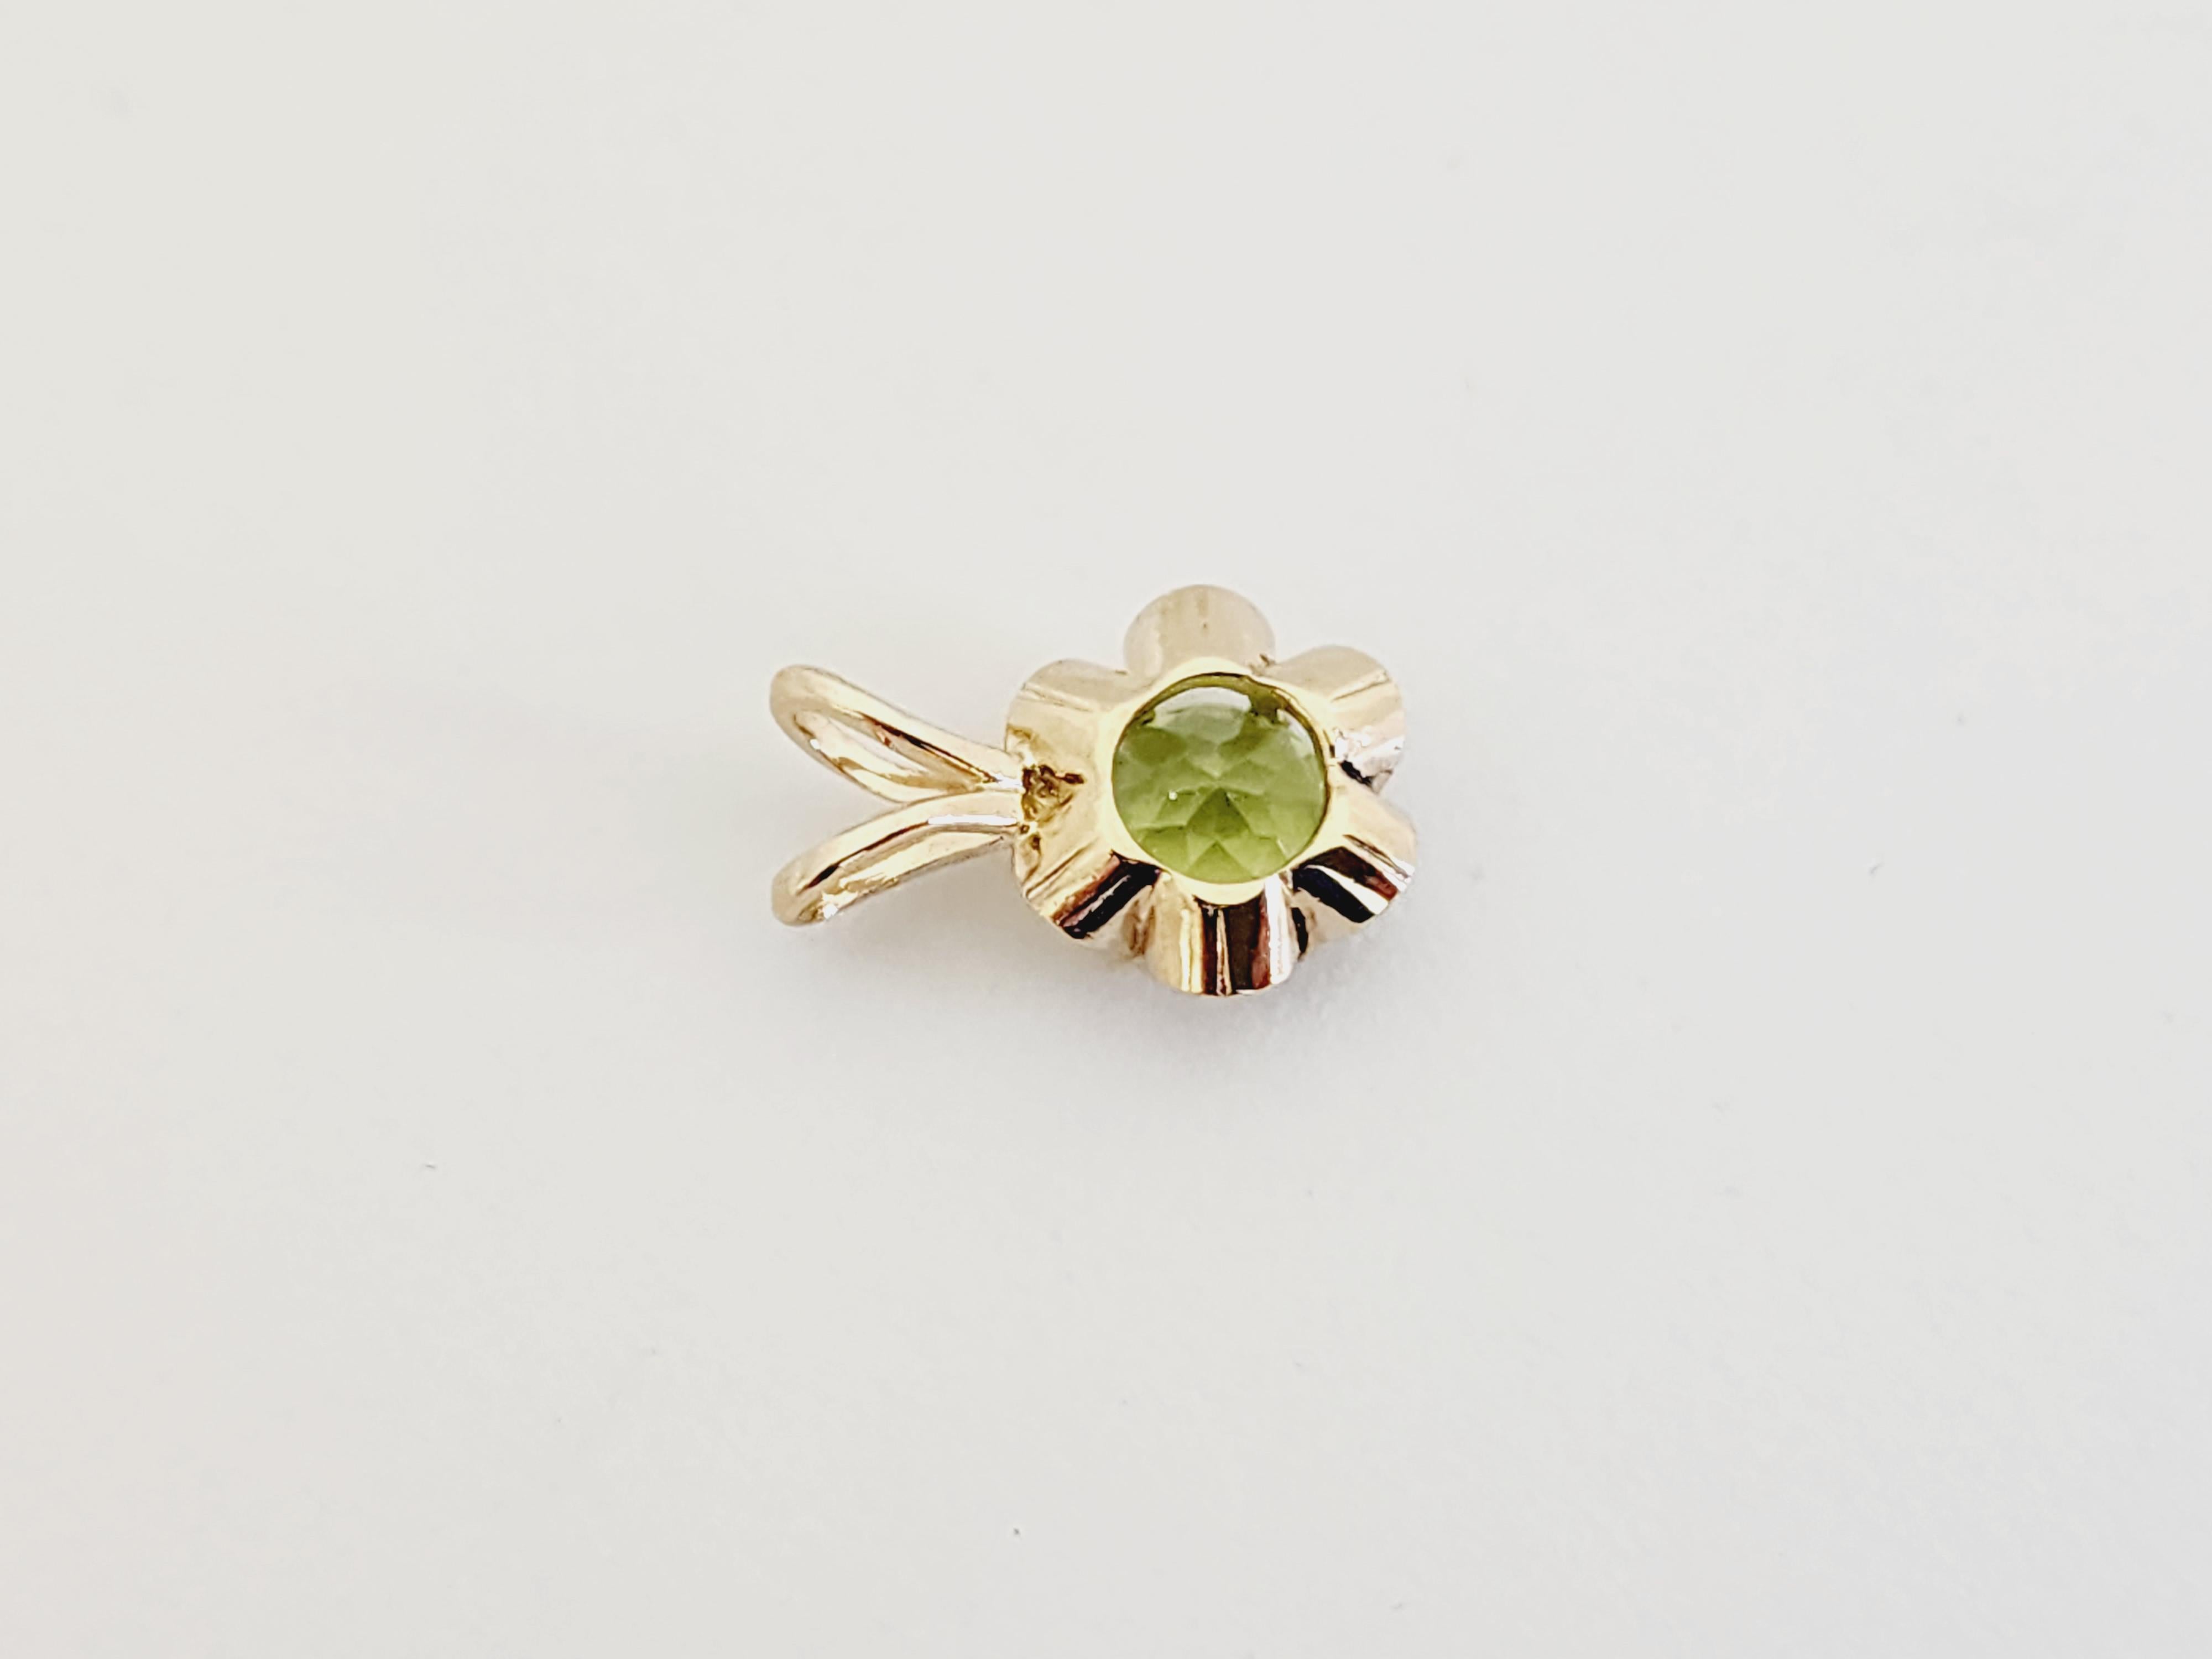 Gorgeous pendant 0.45 Carat Round Peridot Pendant 14 Karat Yellow Gold.  Pendant measures approximately 0.45 inch length and 0.30 inch wide. 

(Pendant Only-Chain sold separately)